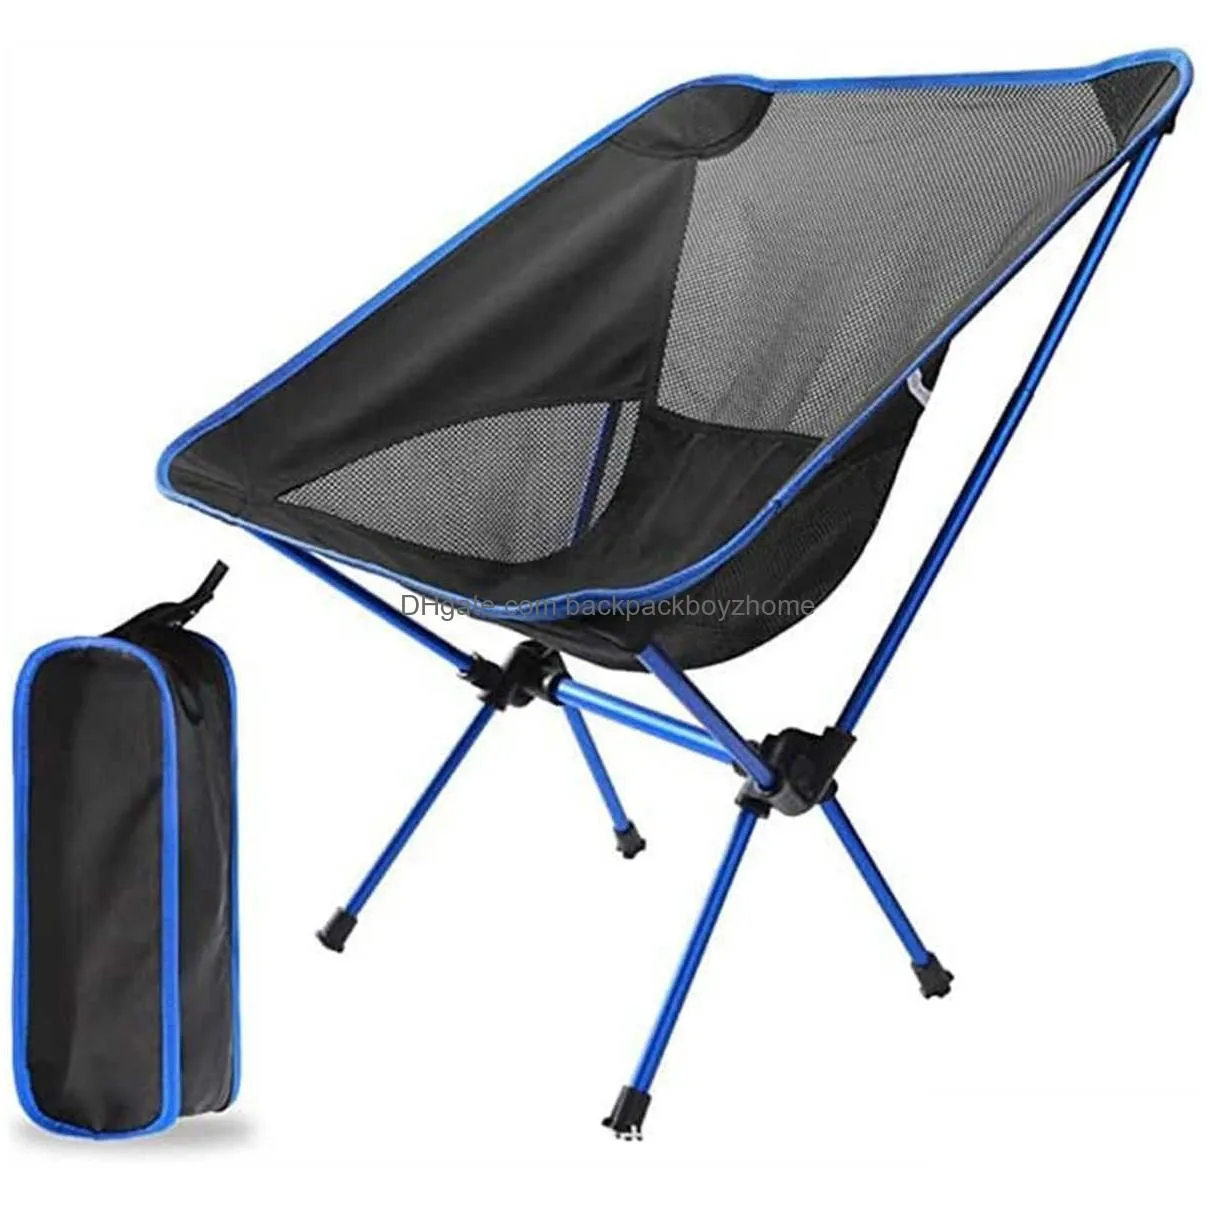 new detachable portable folding moon chair outdoor camping chairs beach fishing chair ultralight travel hiking picnic seat tools